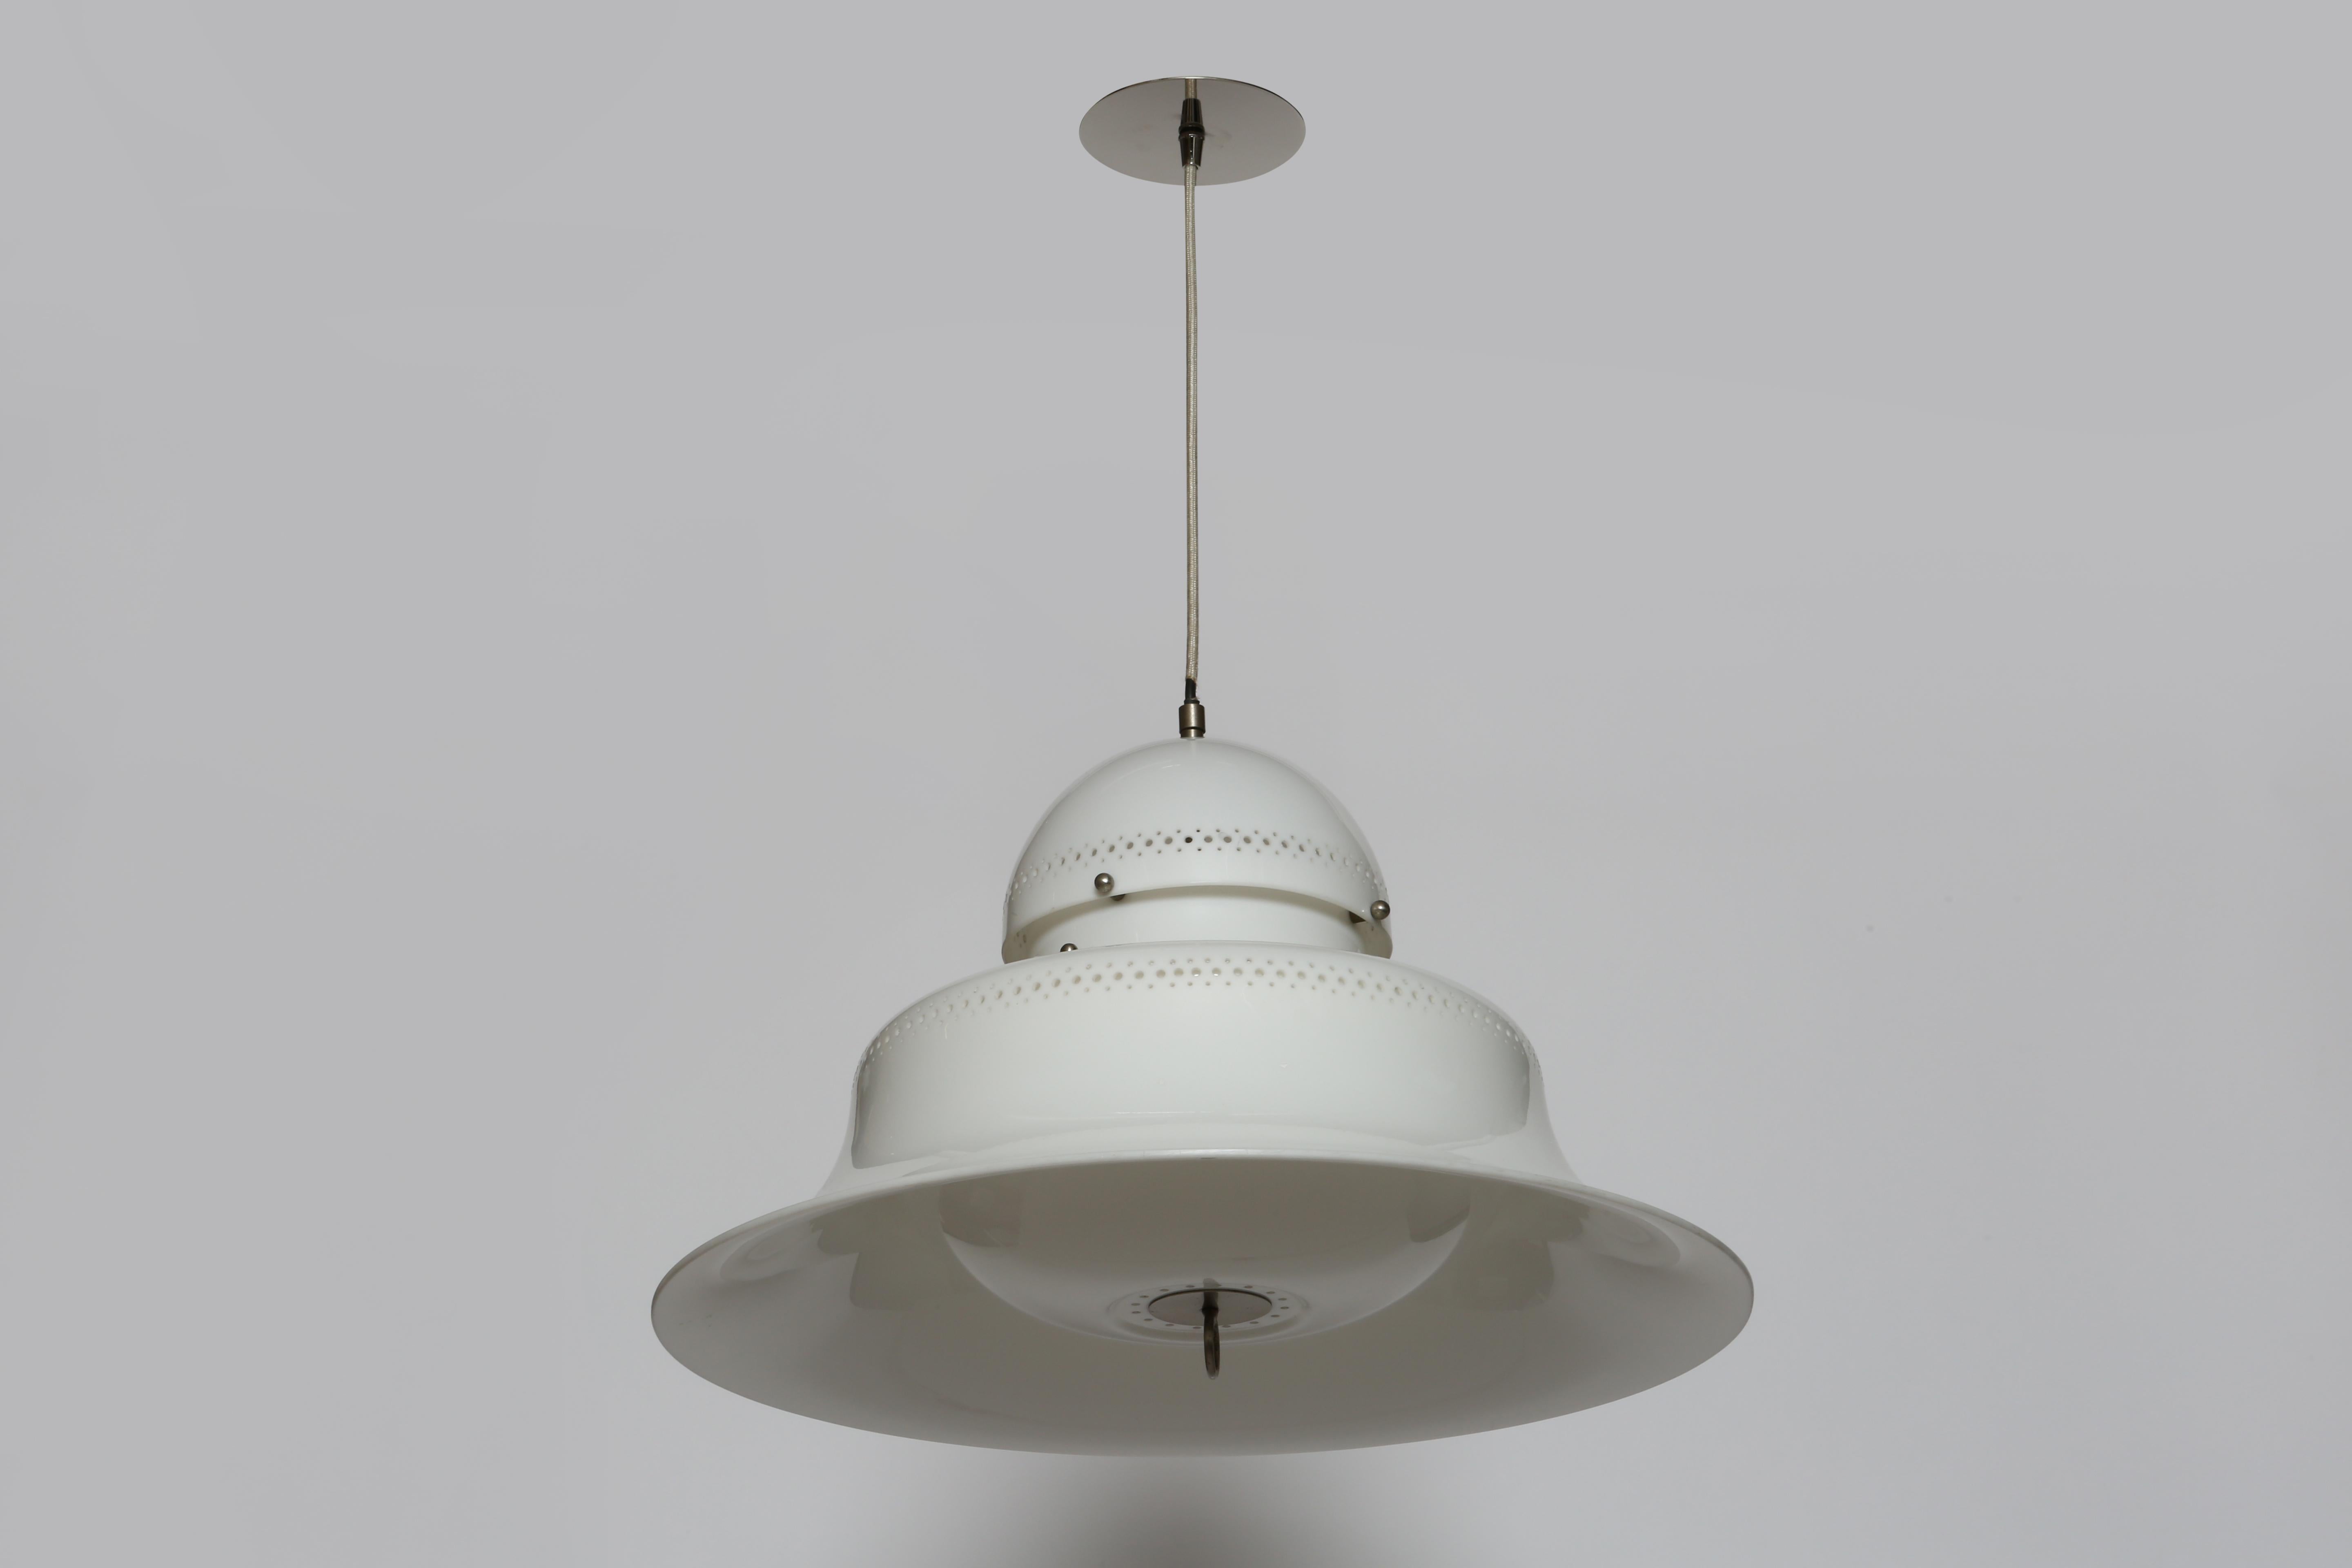 Model KD14 ceiling suspension by Sergio Asti for Kartell.
Designed and made in Italy in 1960s.
Acrylic shade with perforation for light diffusion.
Nickel plated hardware.
Takes 3 candelabra bulbs.
Complimentary US rewiring upon request.
Overall drop